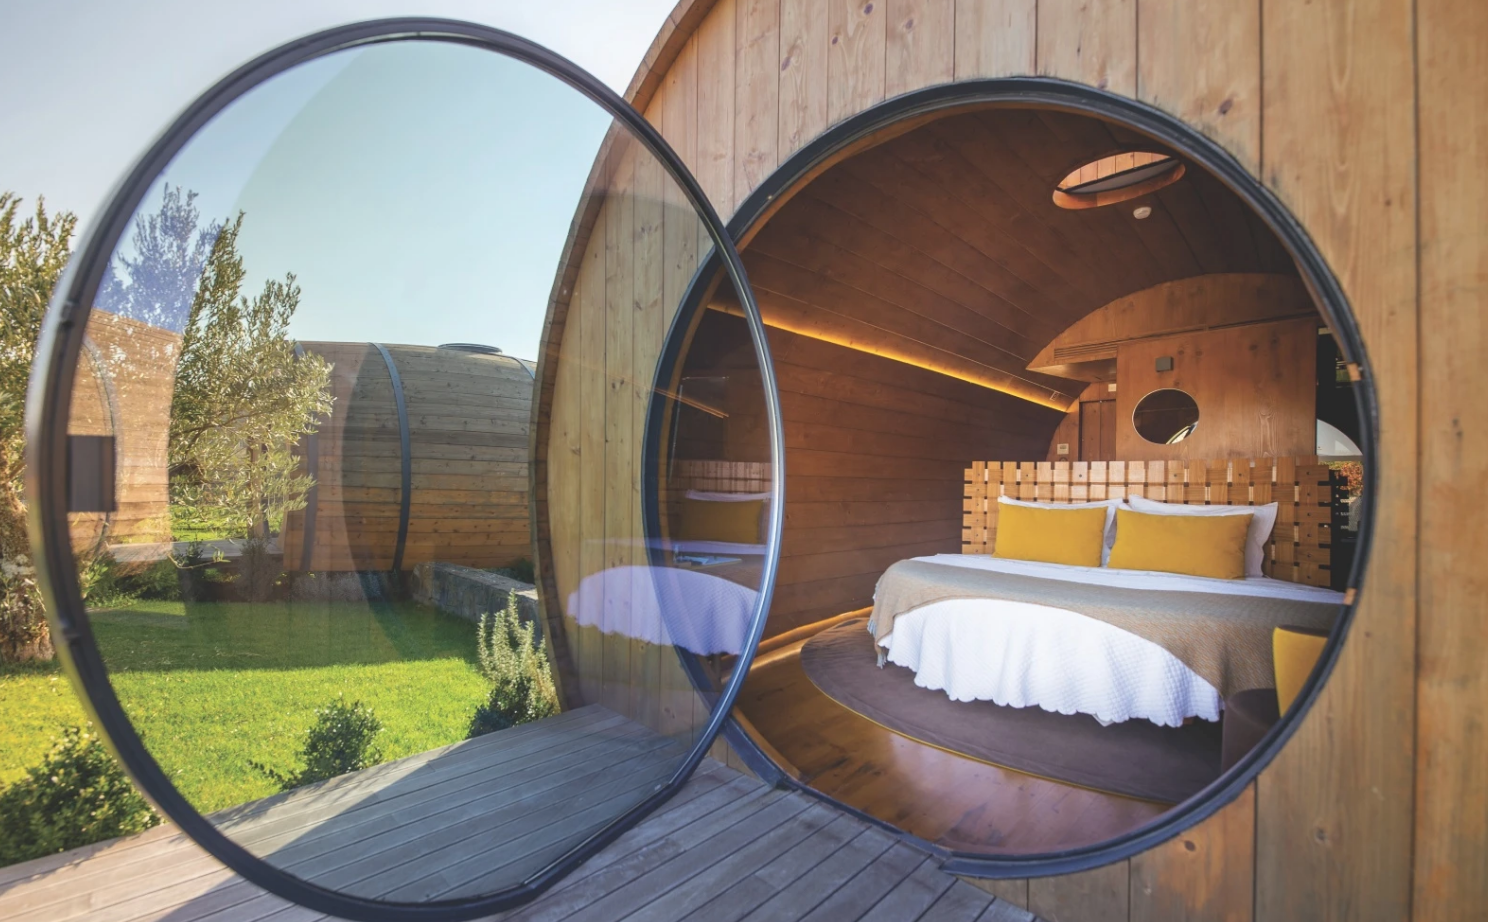 Spend the night in a giant wine barrel at this gorgeous vineyard